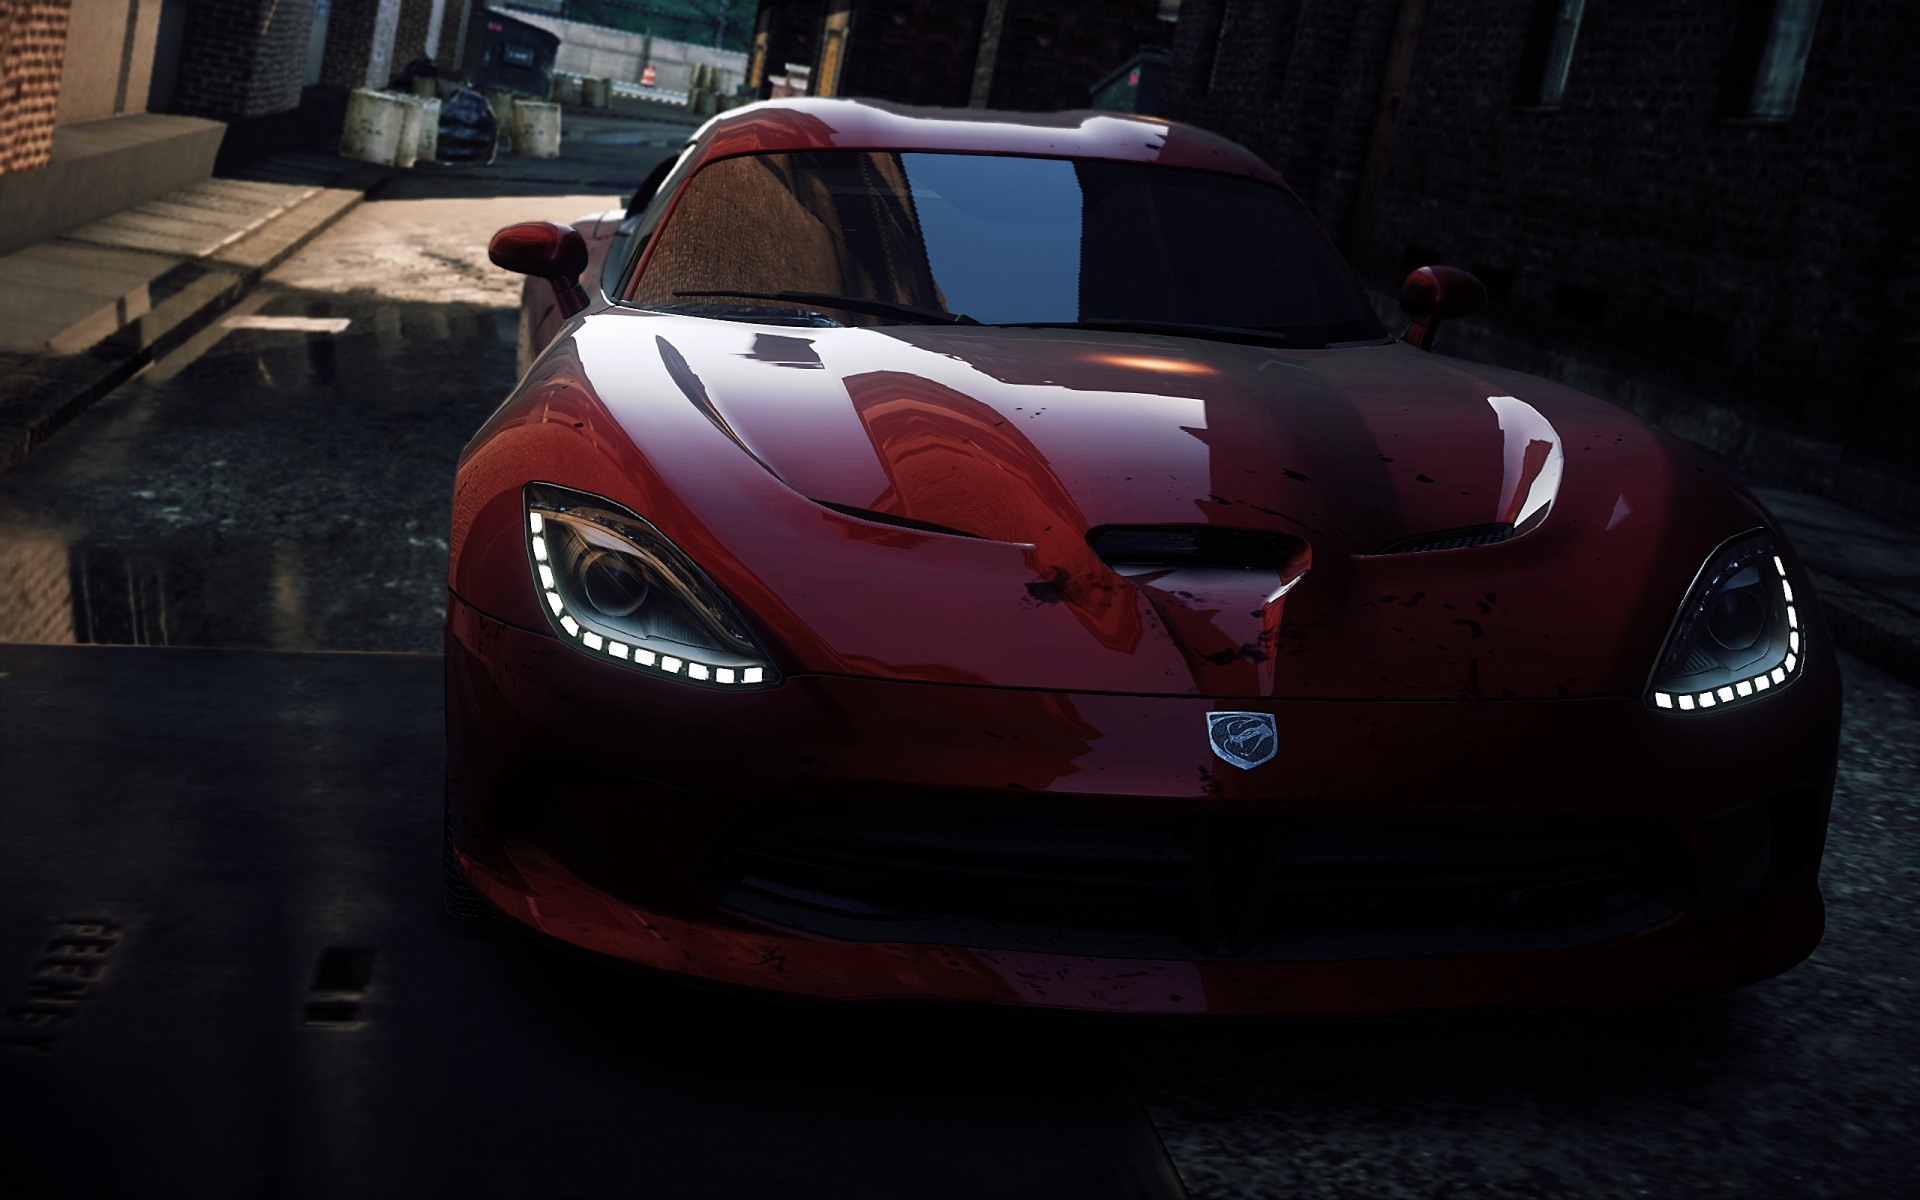 Need for Speed: Most Wanted 极品飞车17：最高通缉 高清壁纸2 - 1920x1200